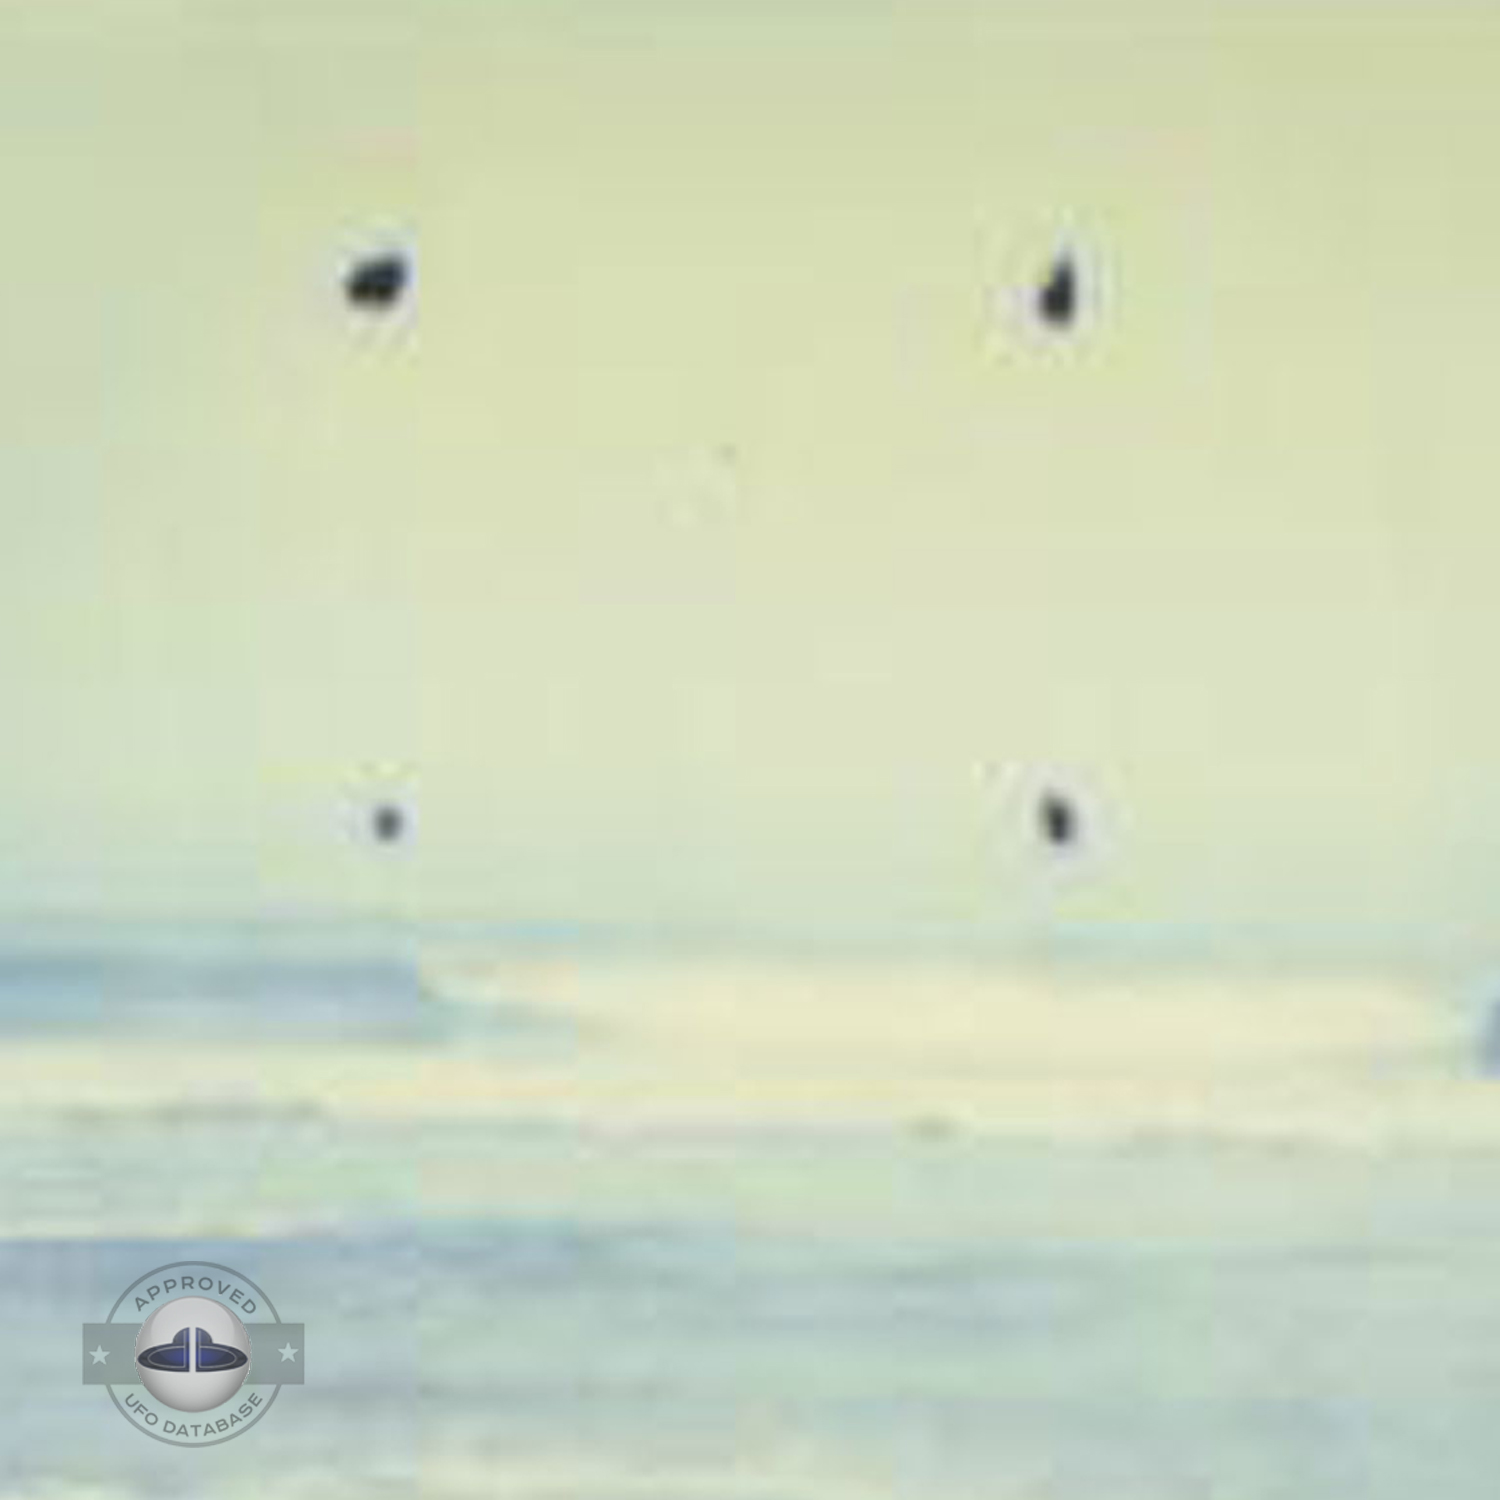 Lake Michigan Sighting of 4 ufos in a square formation - Winter 1985 UFO Picture #92-3